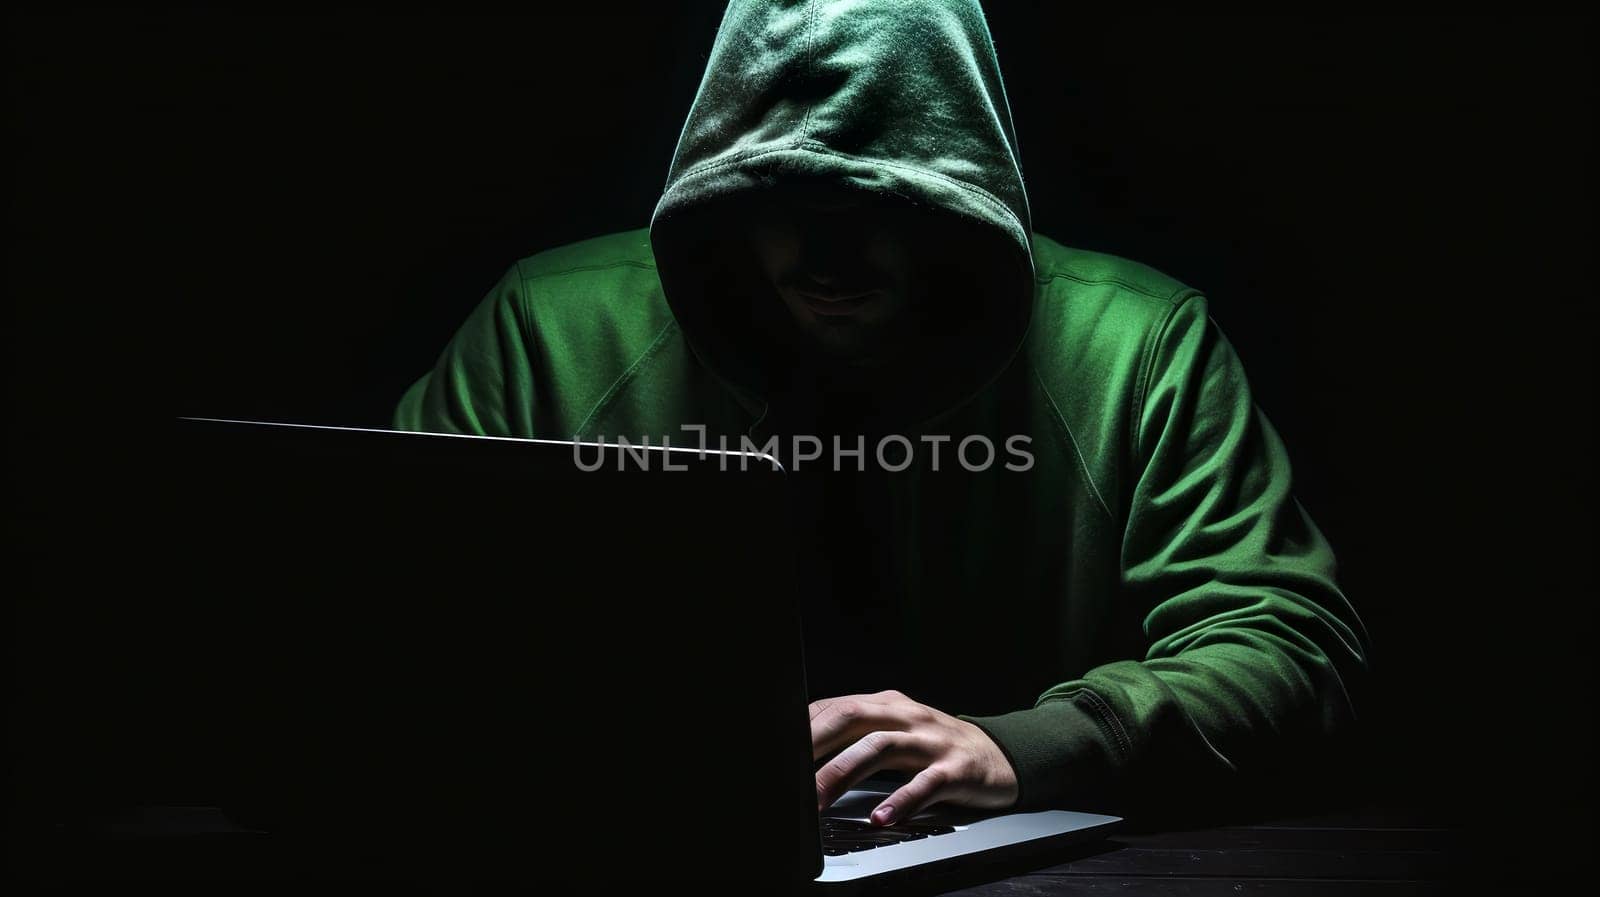 Hacker on black background - Cybersecurity concept by chrisroll